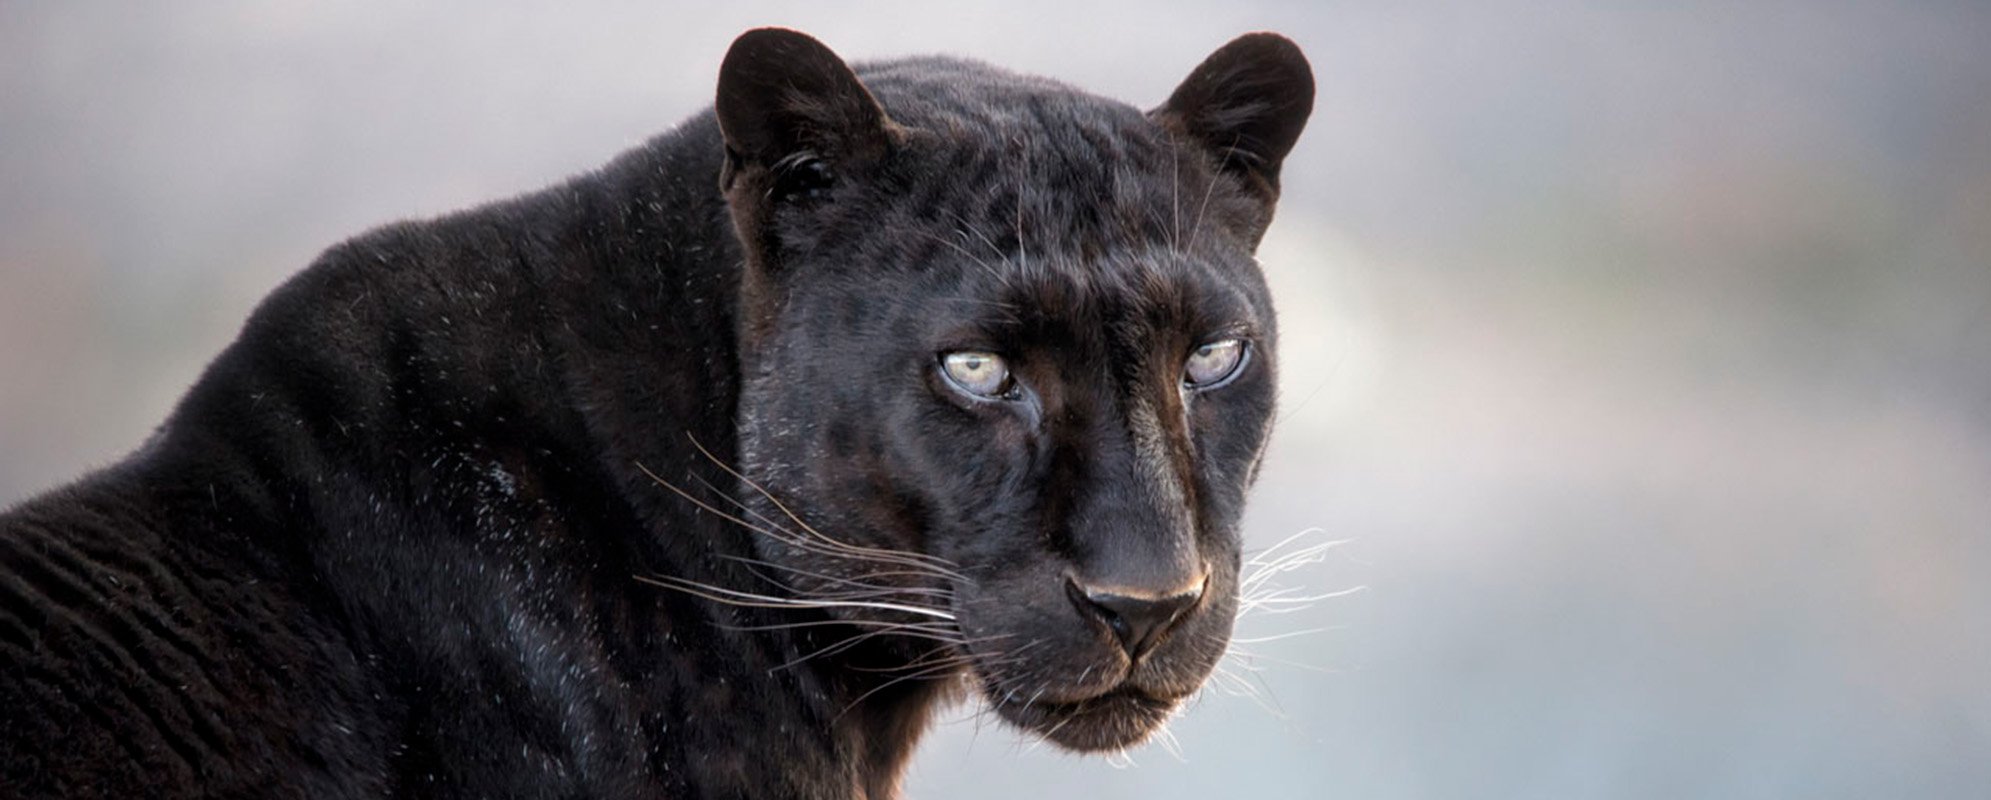 Black Leopard - Out of Africa Wildlife Park